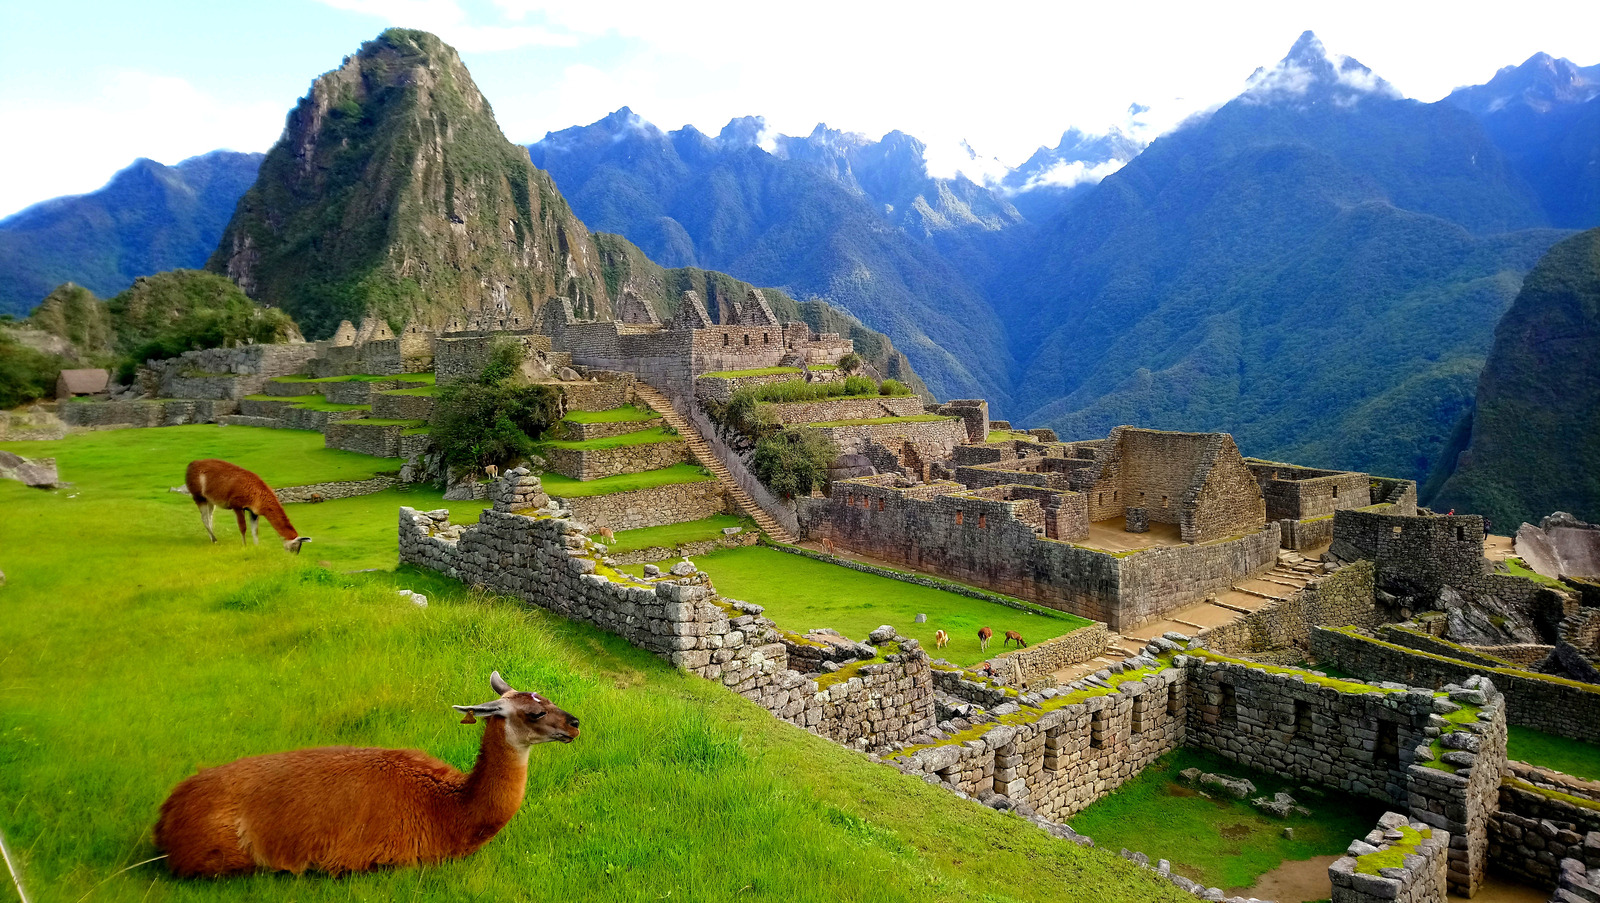 10 Interesting Facts about Machu Picchu That You Need to Know